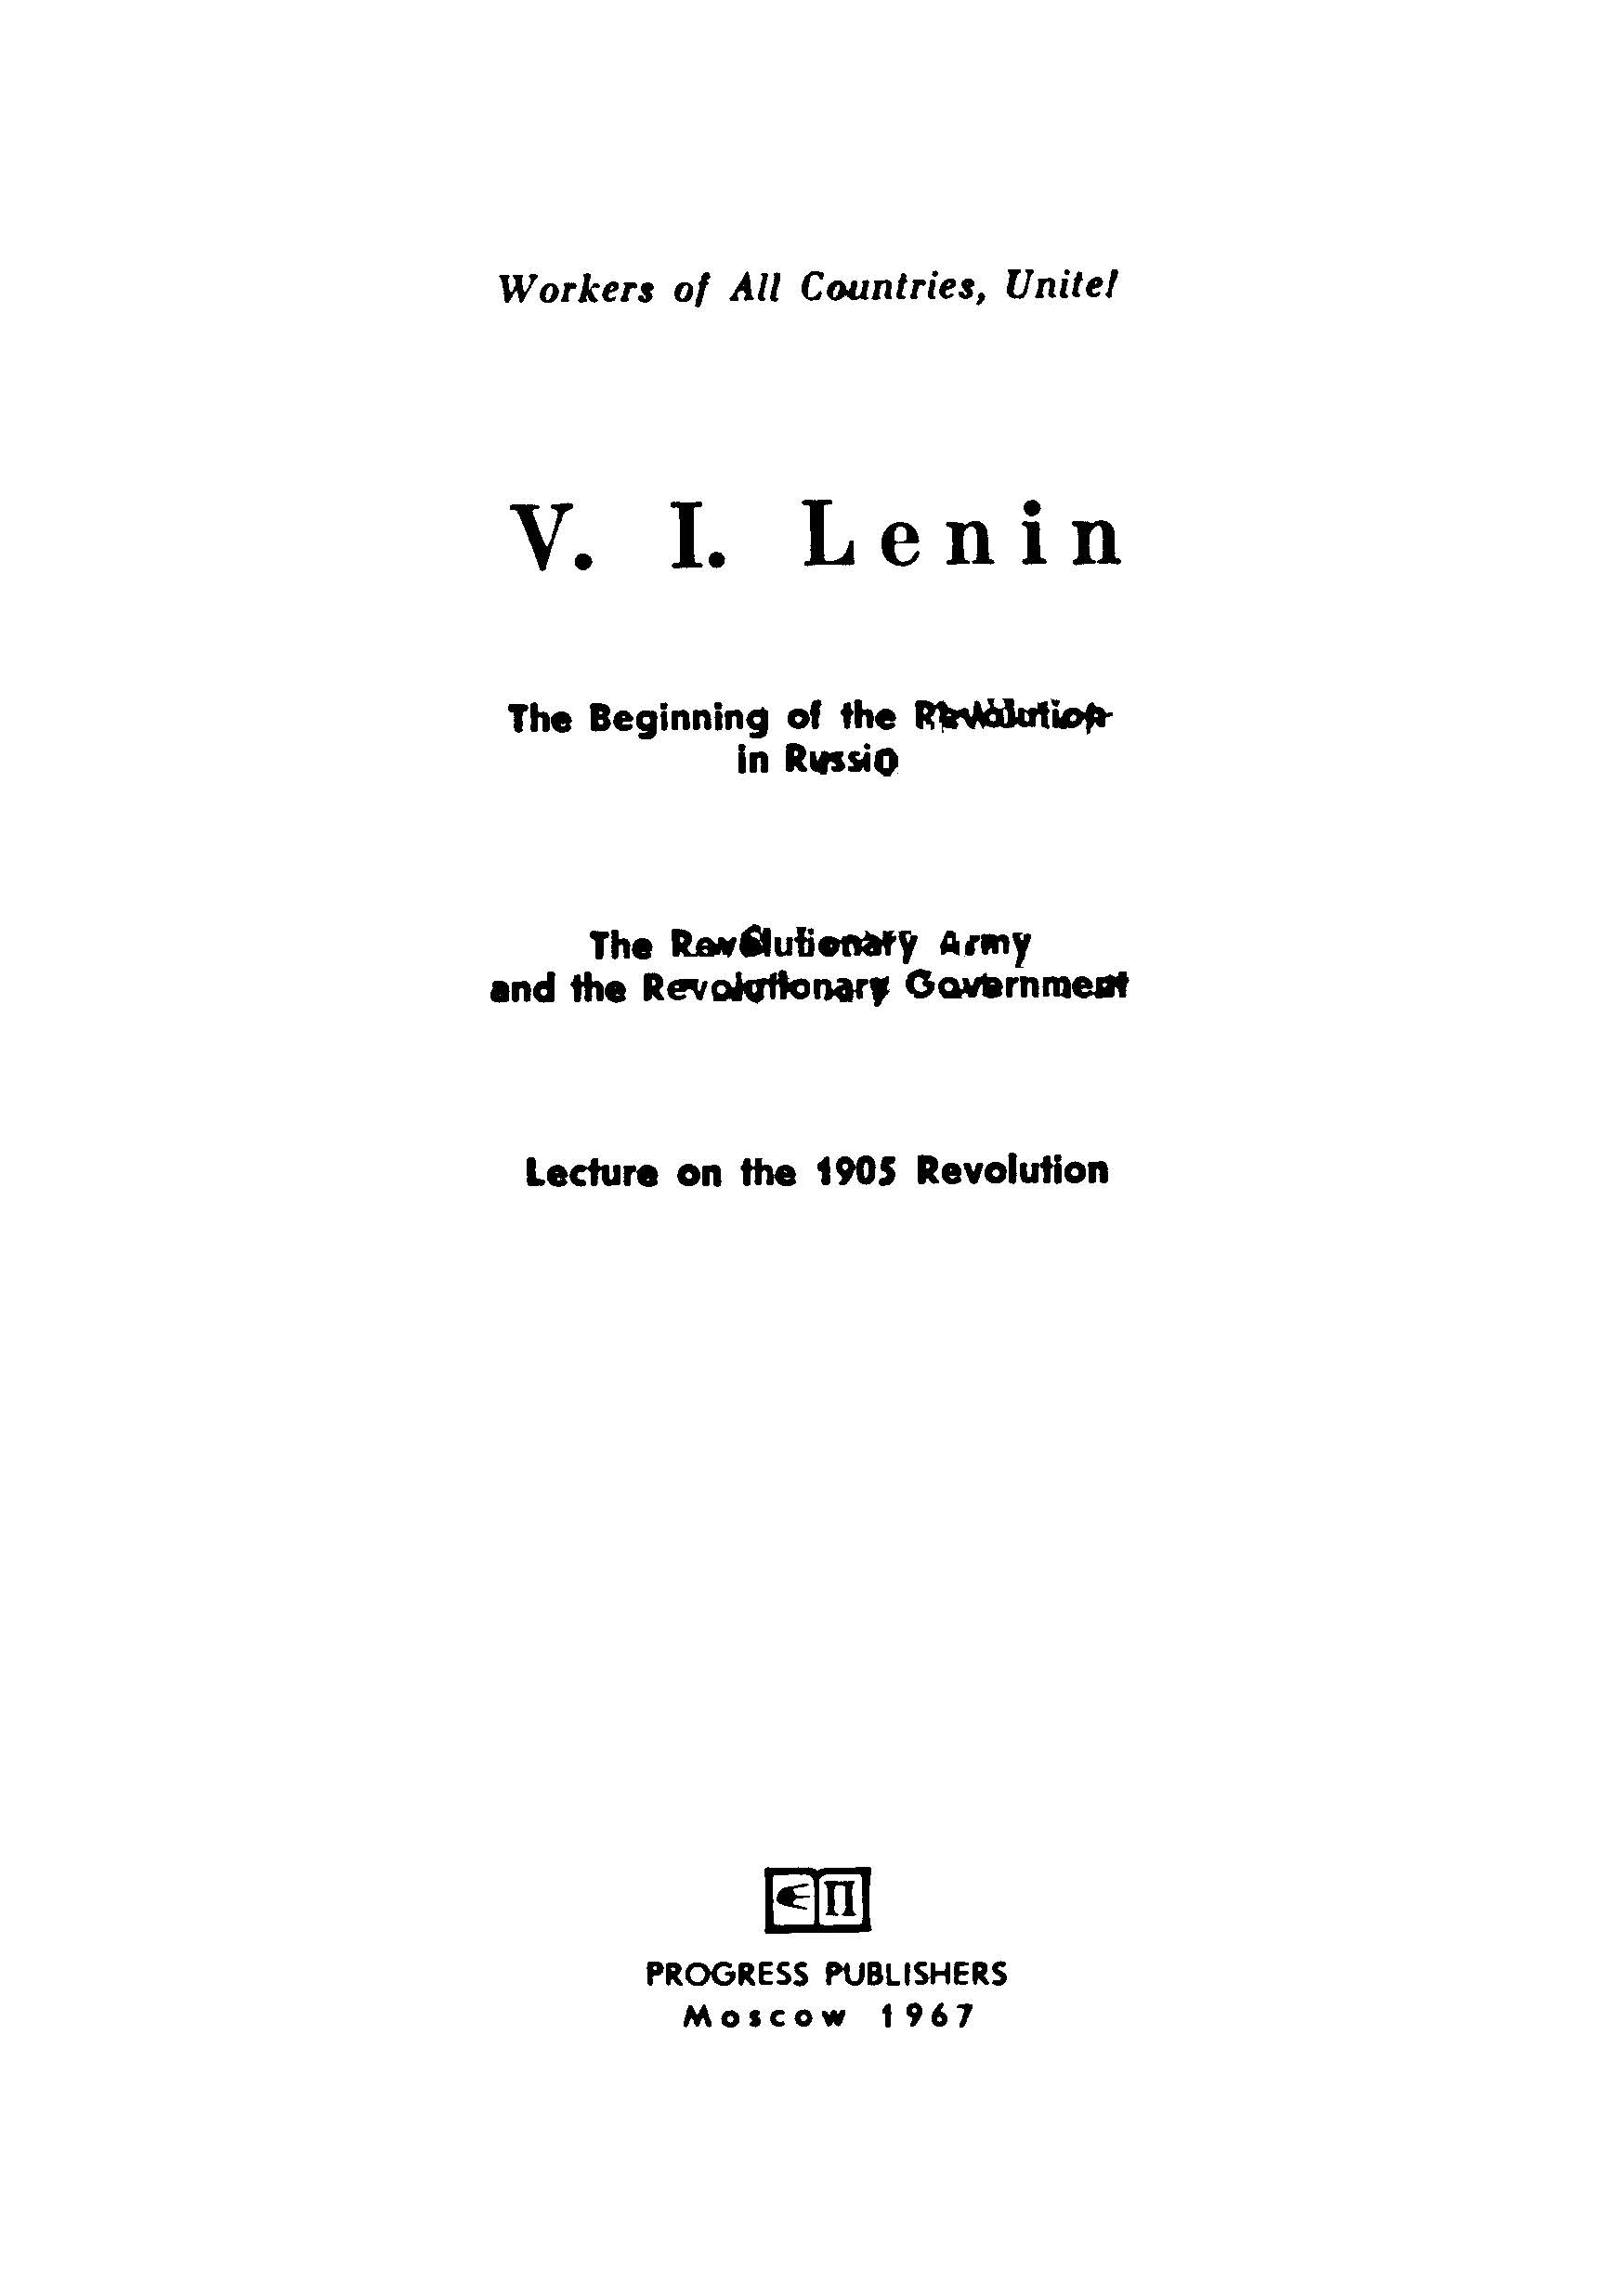 V.L.Lenin the beginning of the revilution in russia